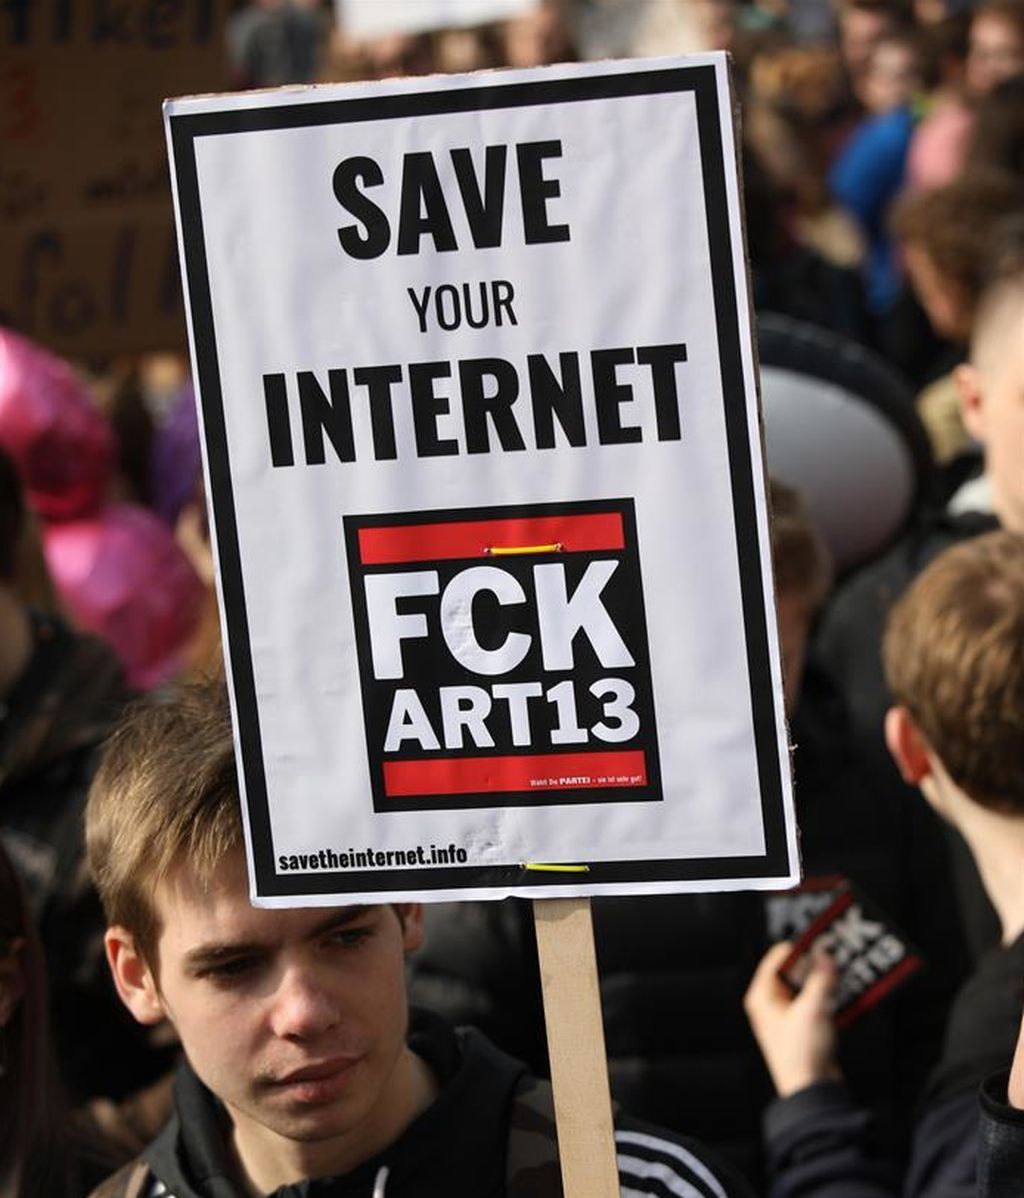 Save your Internet